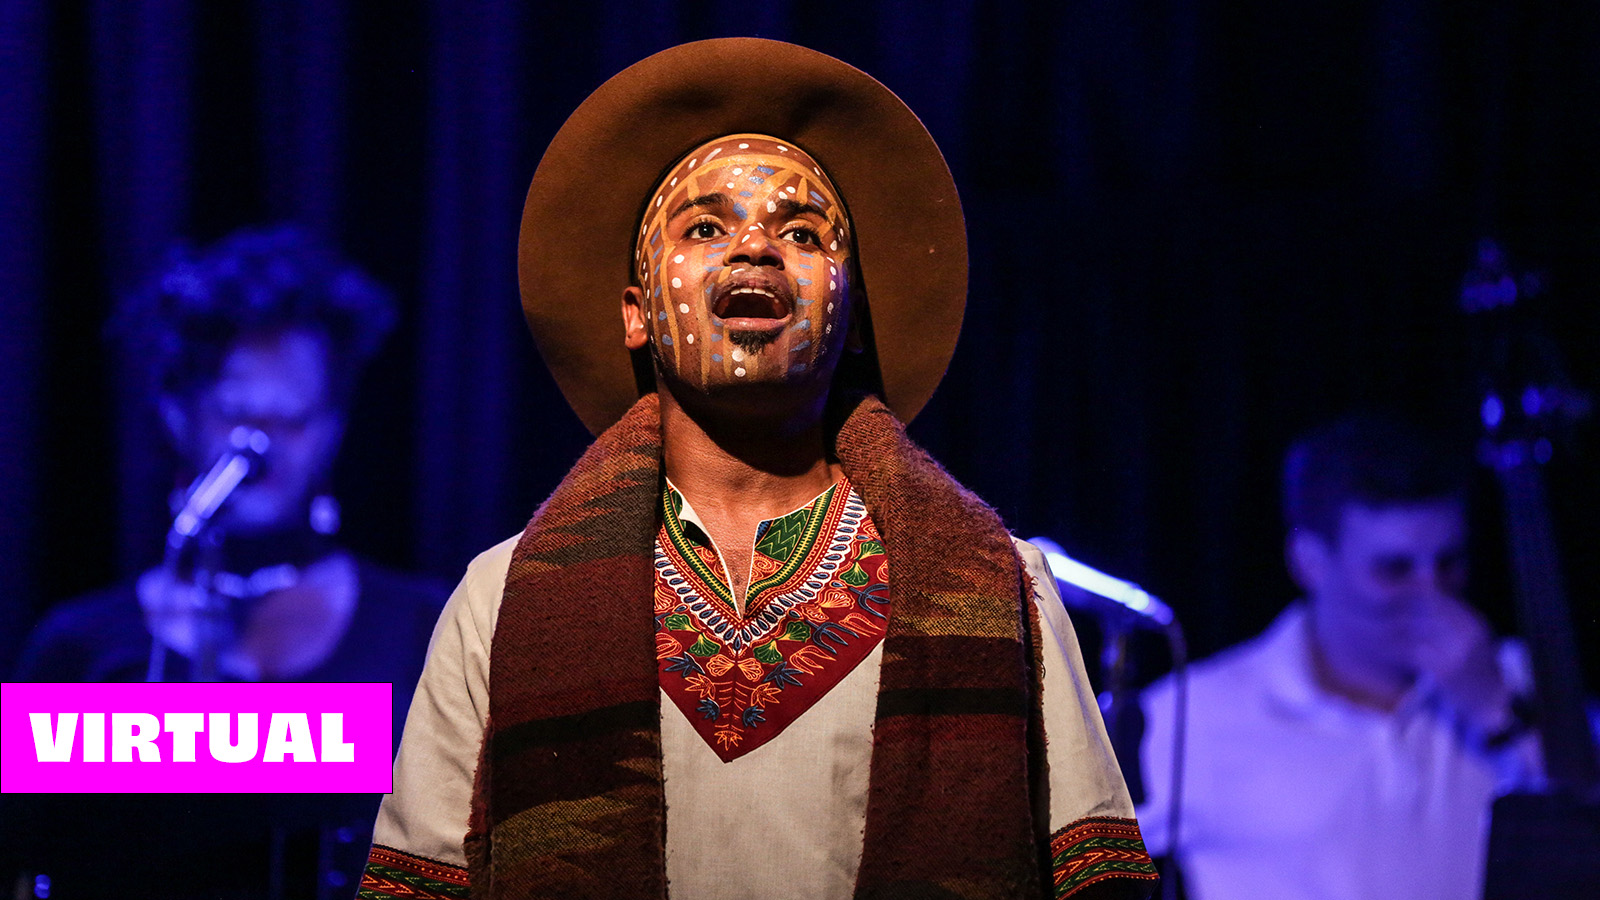 Alphonso Horne is wearing a brown hat, scarf, and embroidered shirt with face paint on while singing onstage